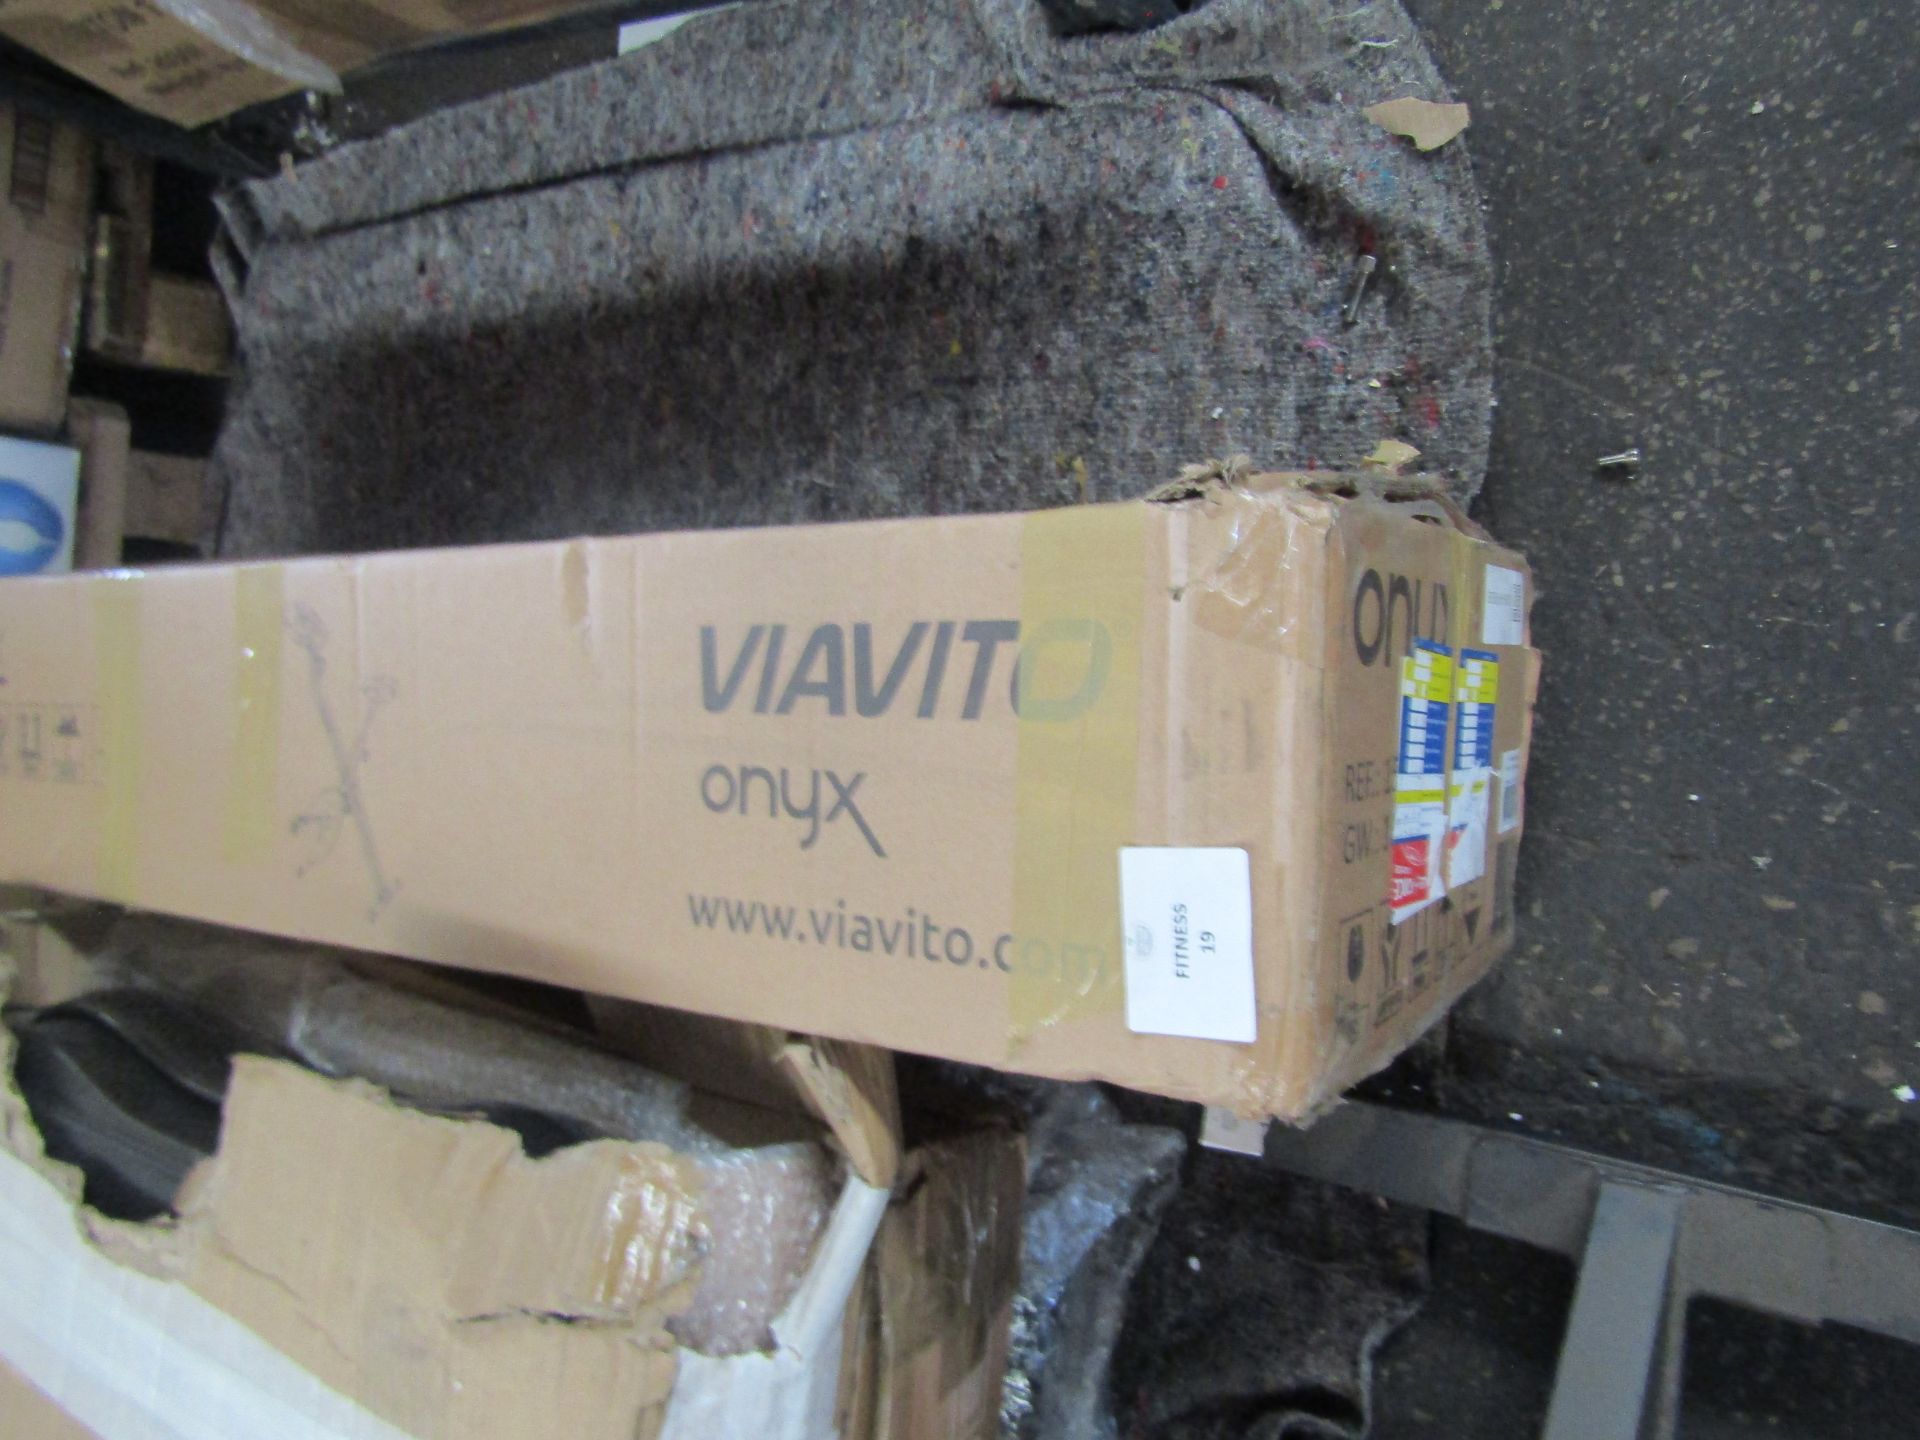 Sweatband ViaVito Onyx Folding Exercise Bike RRP £99.99, unchecked and boxed